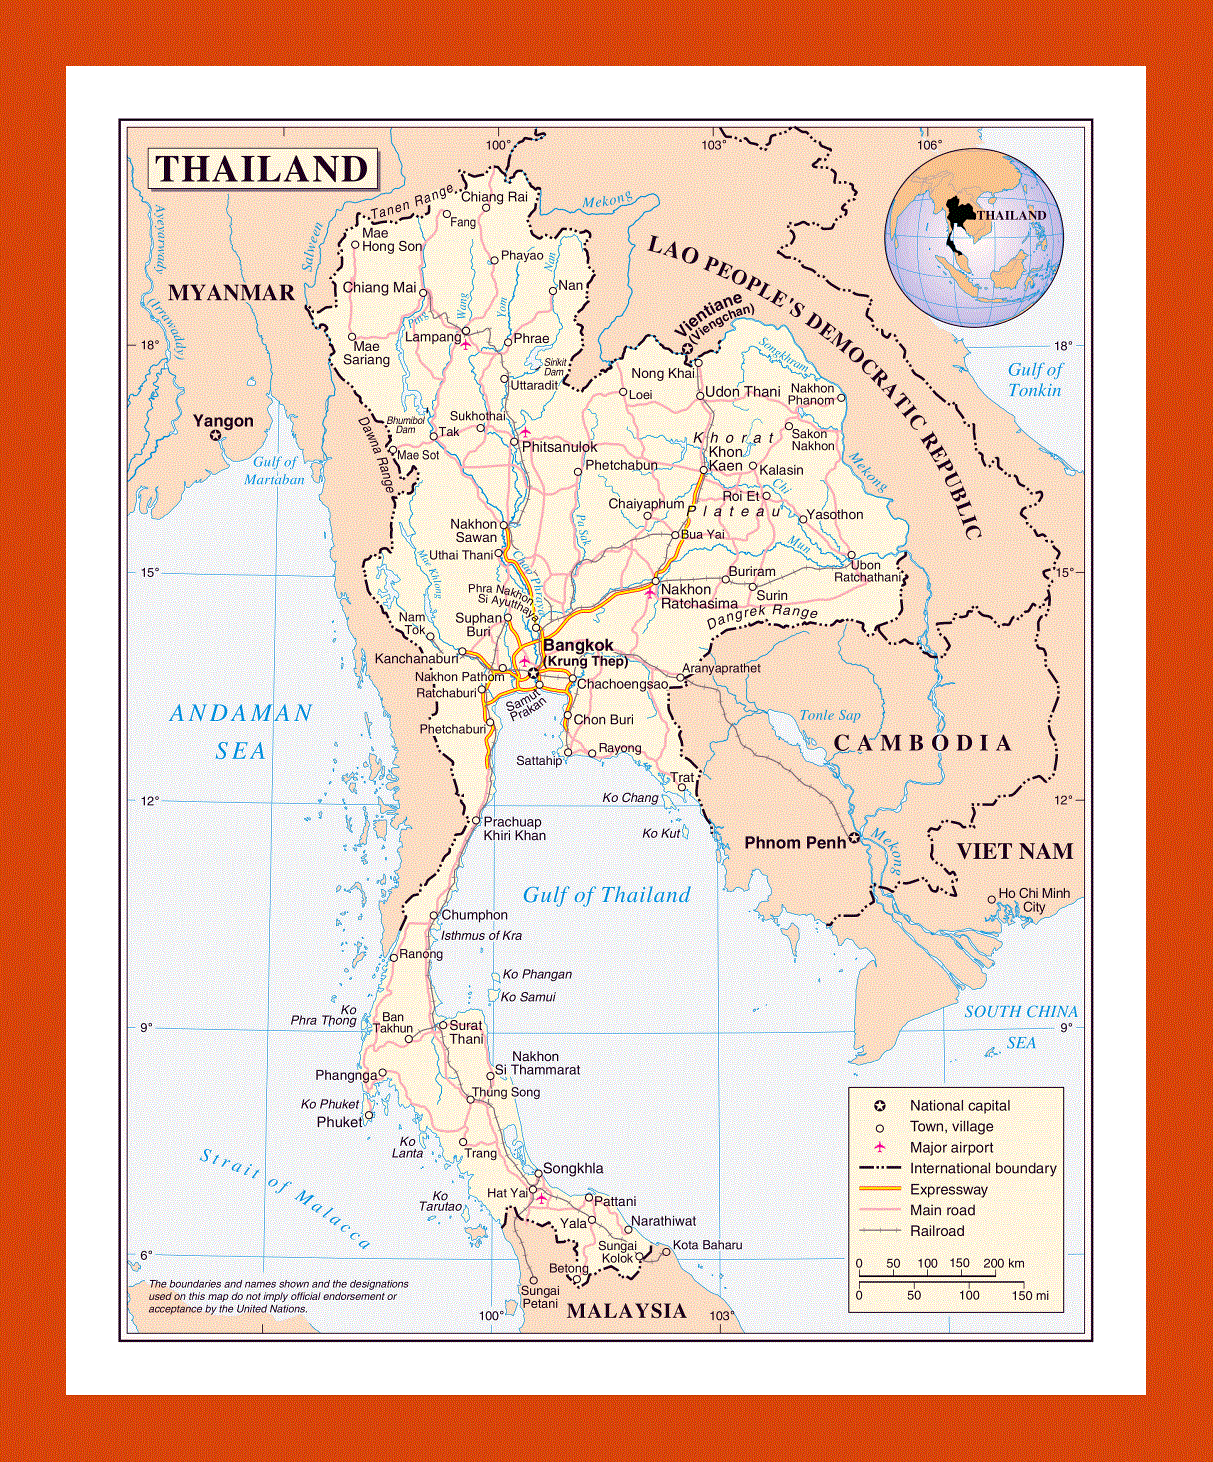 Political map of Thailand